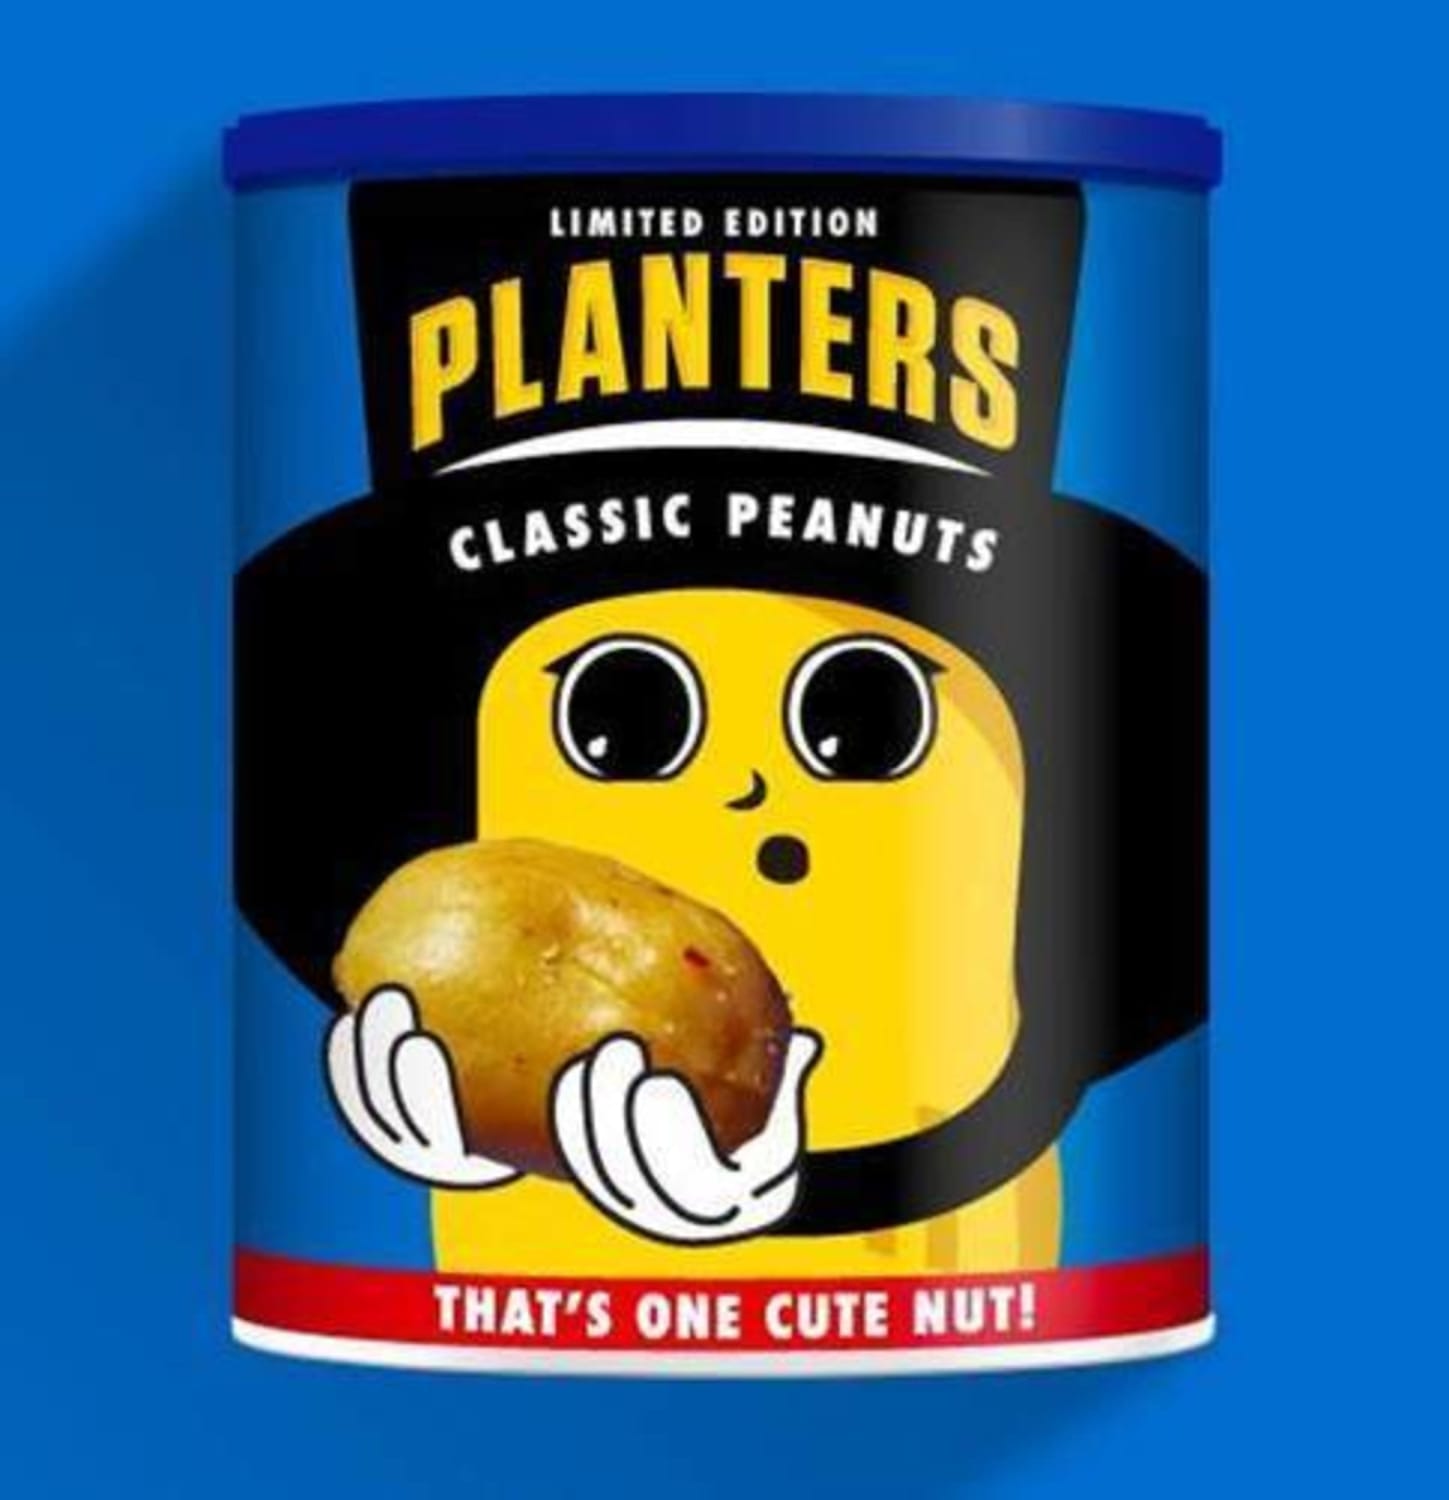 Planters Baby Nut brings extra cuteness to snack time